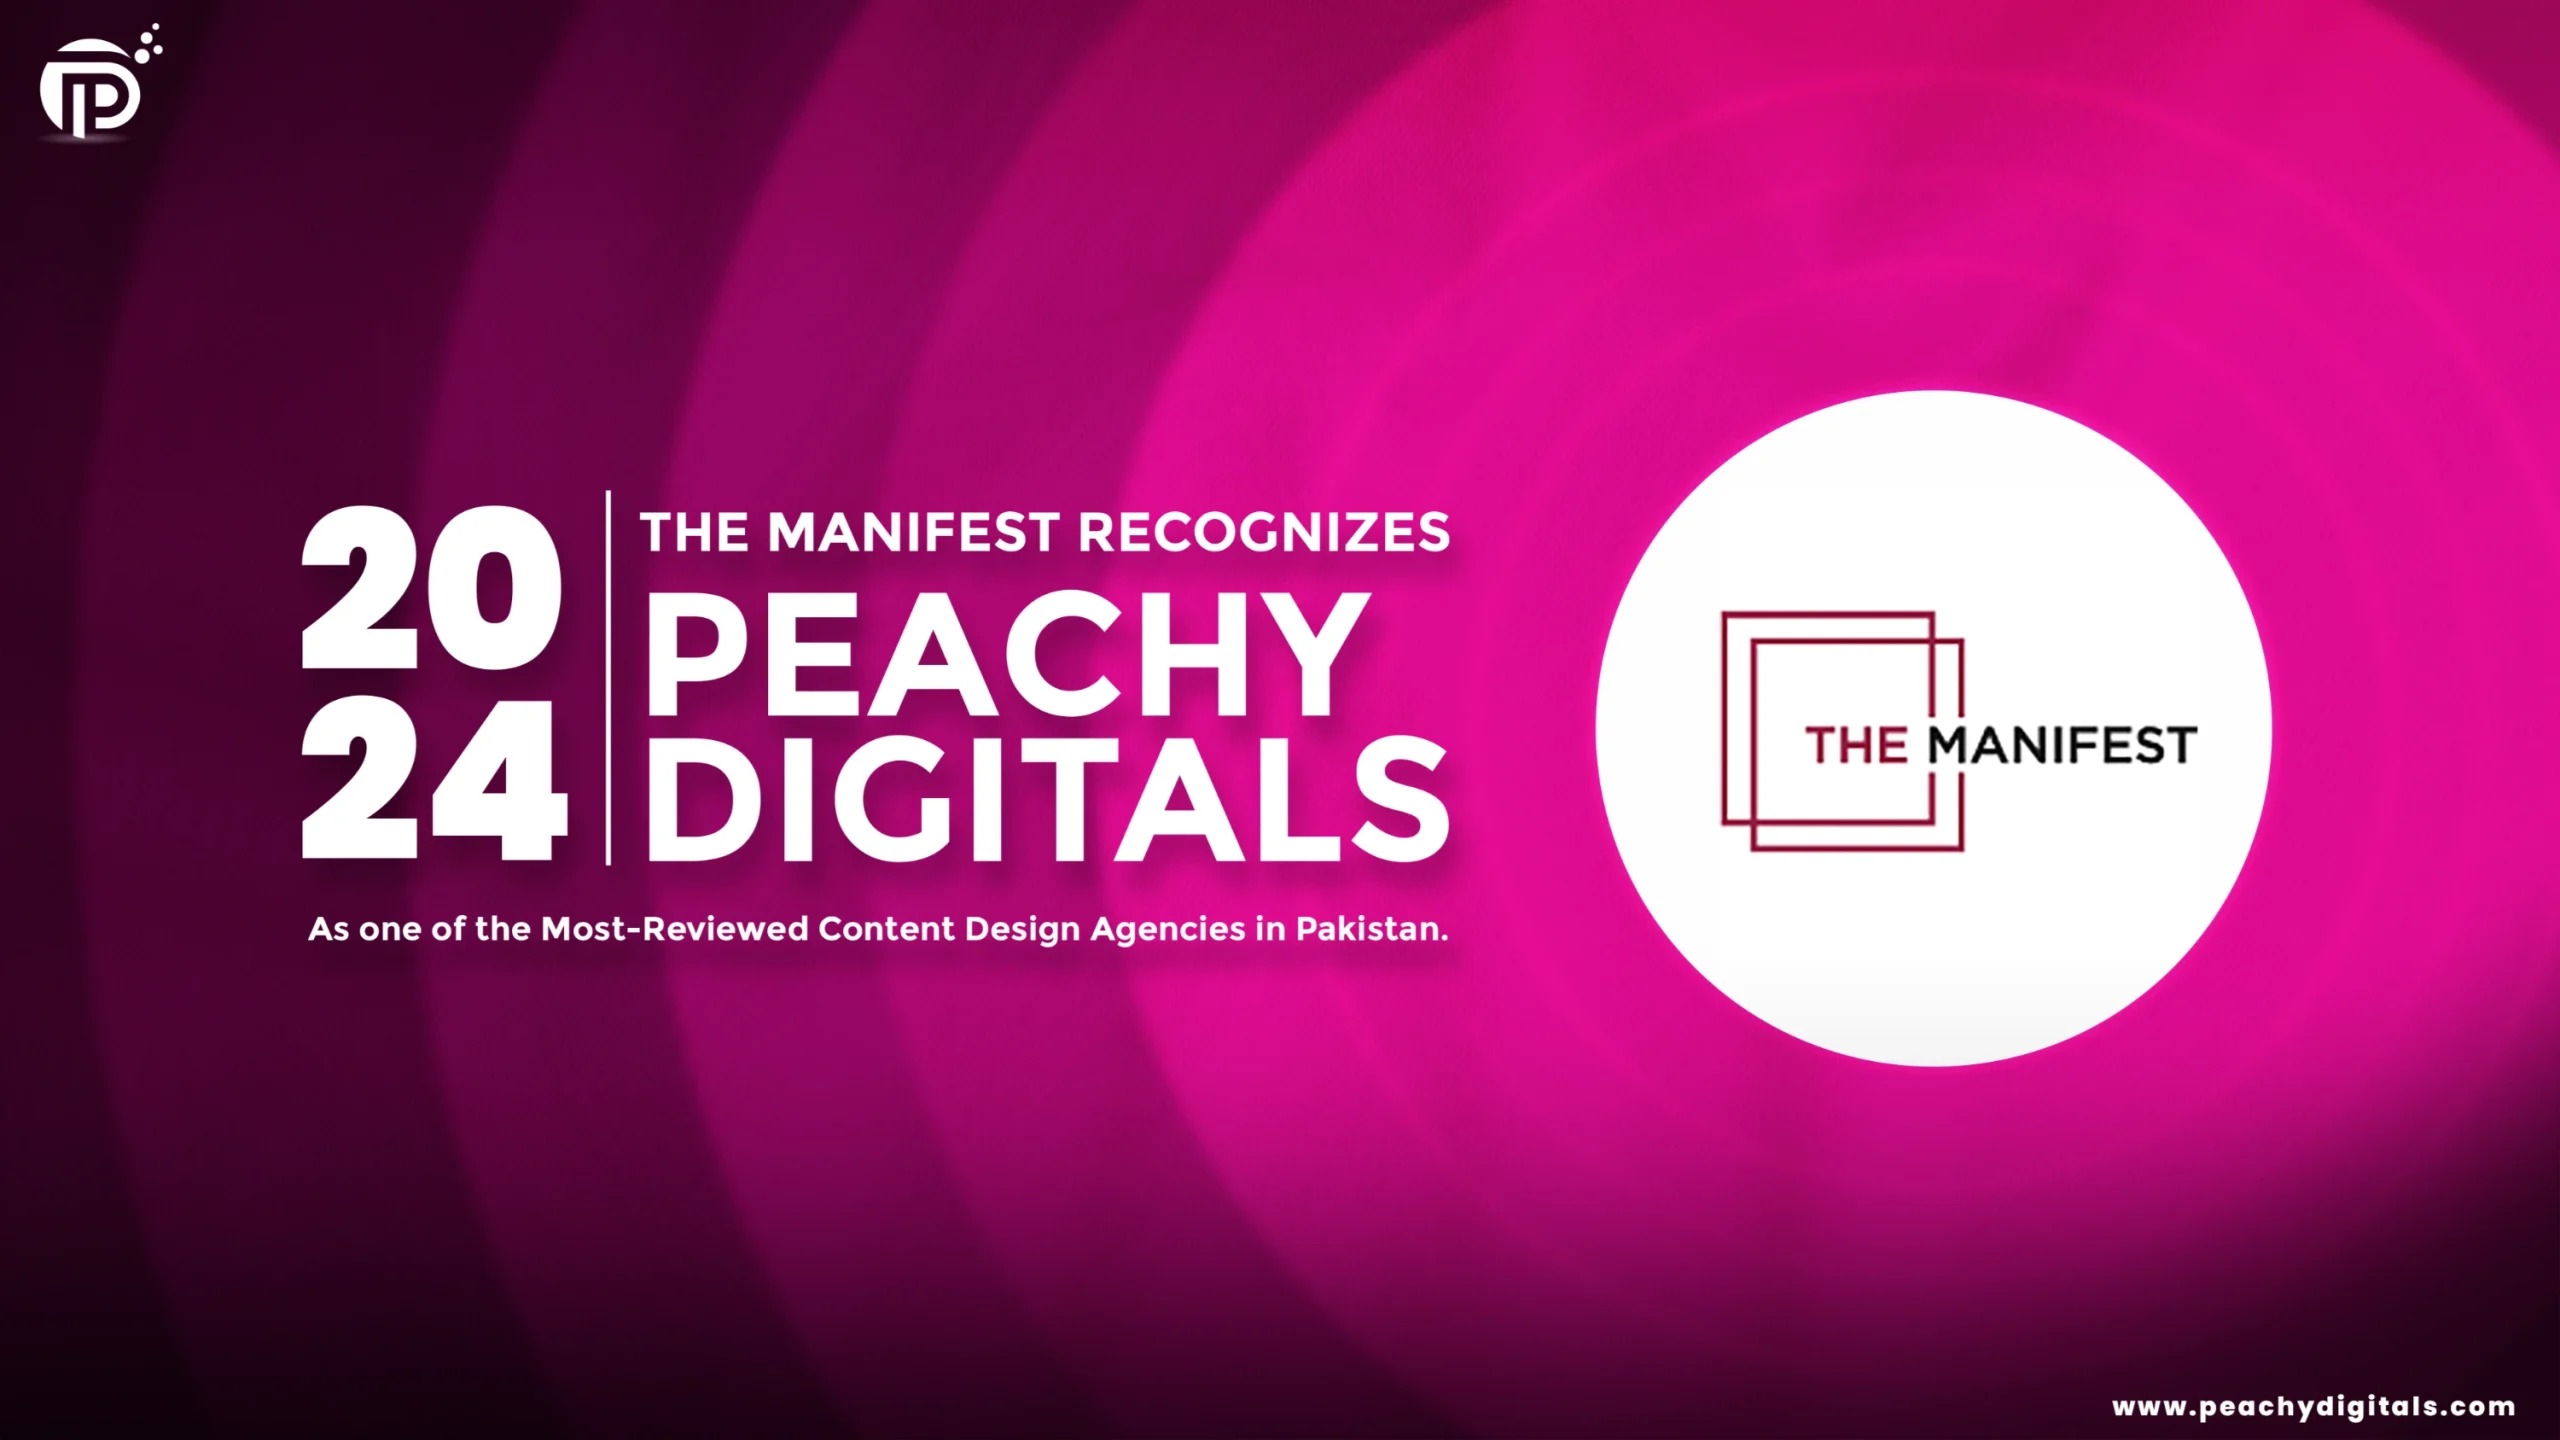 The Manifest Recognizes Peachy Digitals as one of the Most-Reviewed Content Design Agencies in Pakistan